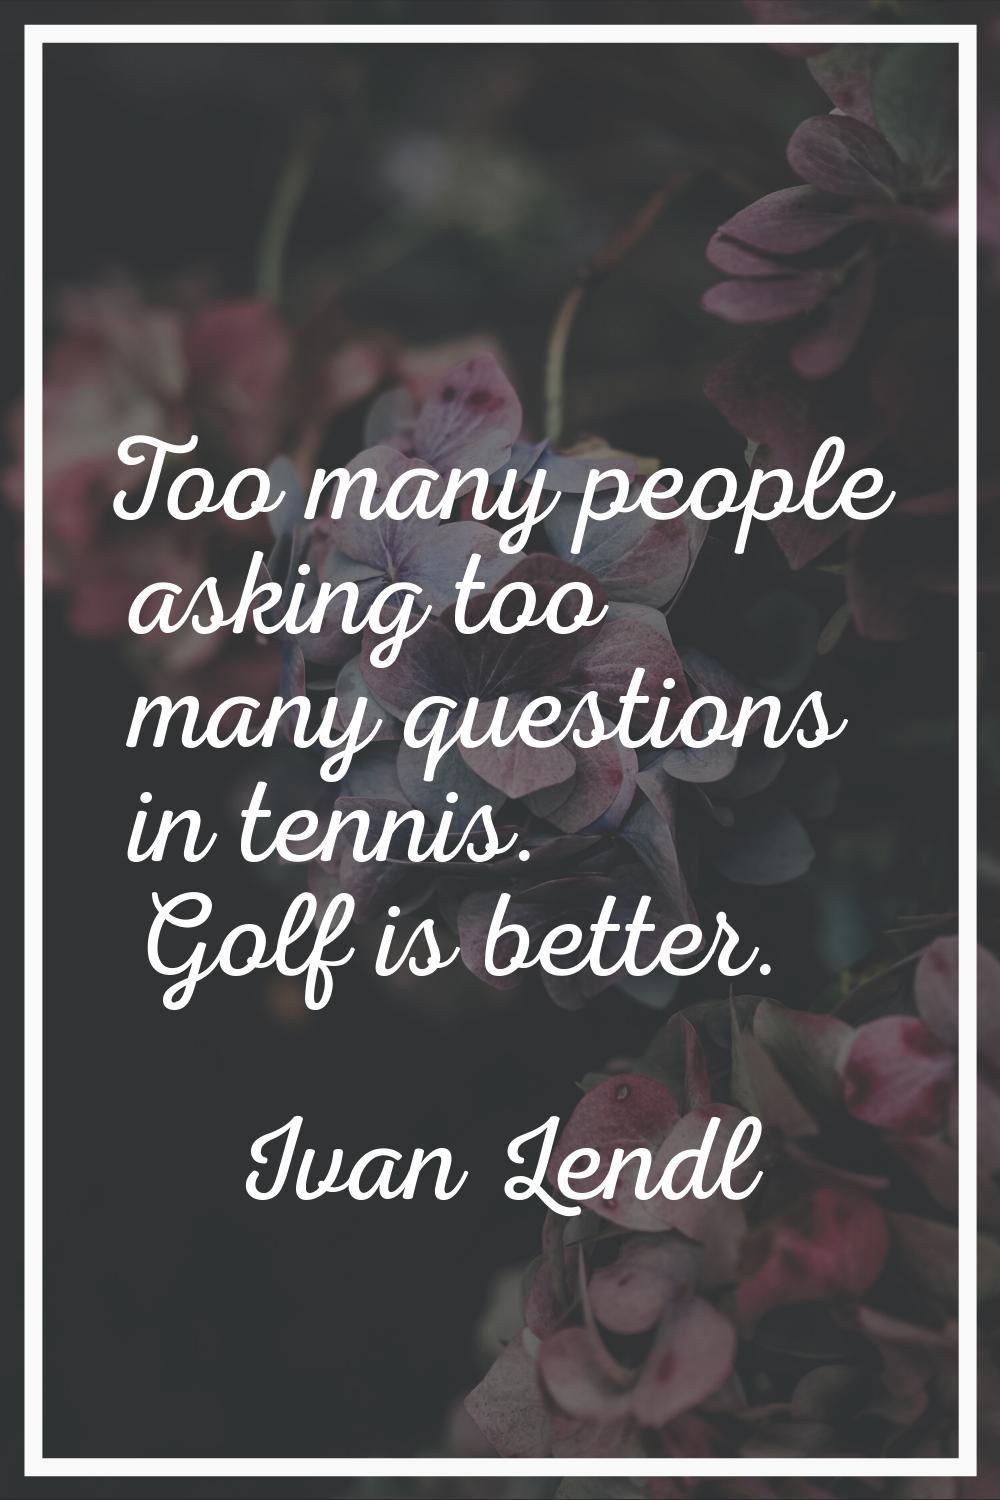 Too many people asking too many questions in tennis. Golf is better.